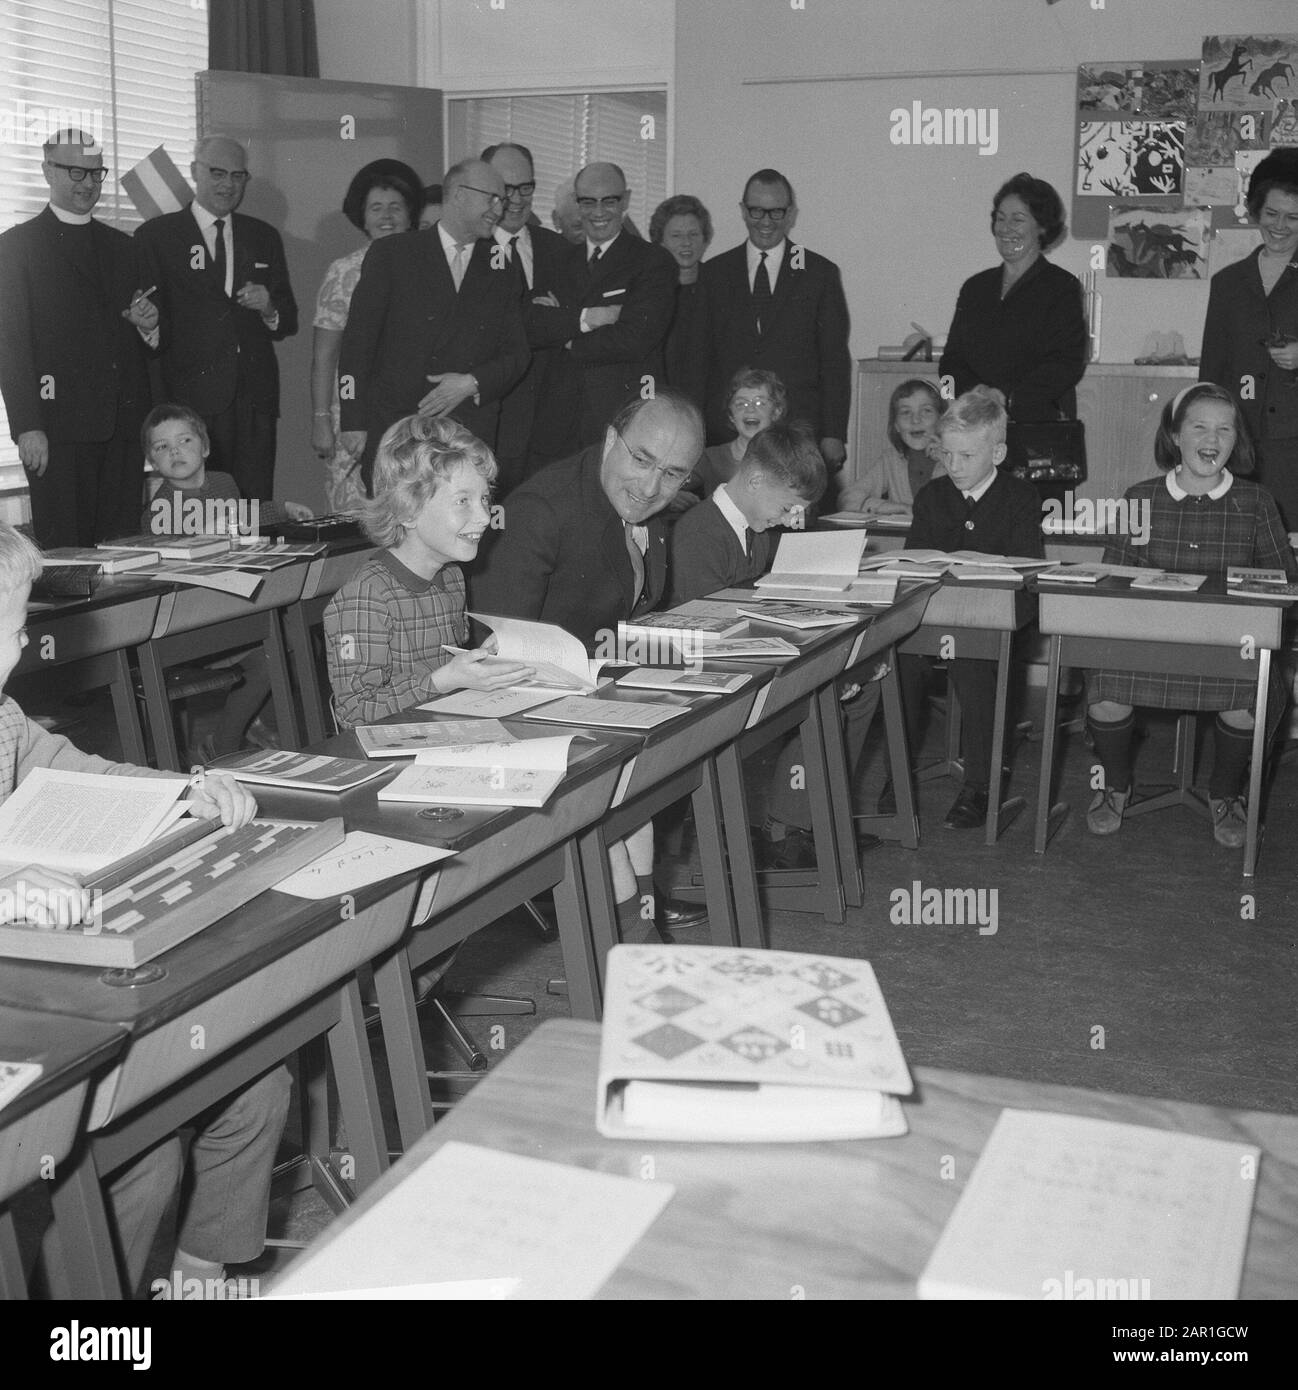 Minister-President Cals during the opening of the Mr. Calsschool in Rotterdam  Prime Minister Cals sitting behind a table, next to a student Date: 27 October 1965 Location: Rotterdam, South Holland Keywords: pupils, ministers-presidents, openings, schools Personal name: Cals, Jo Stock Photo